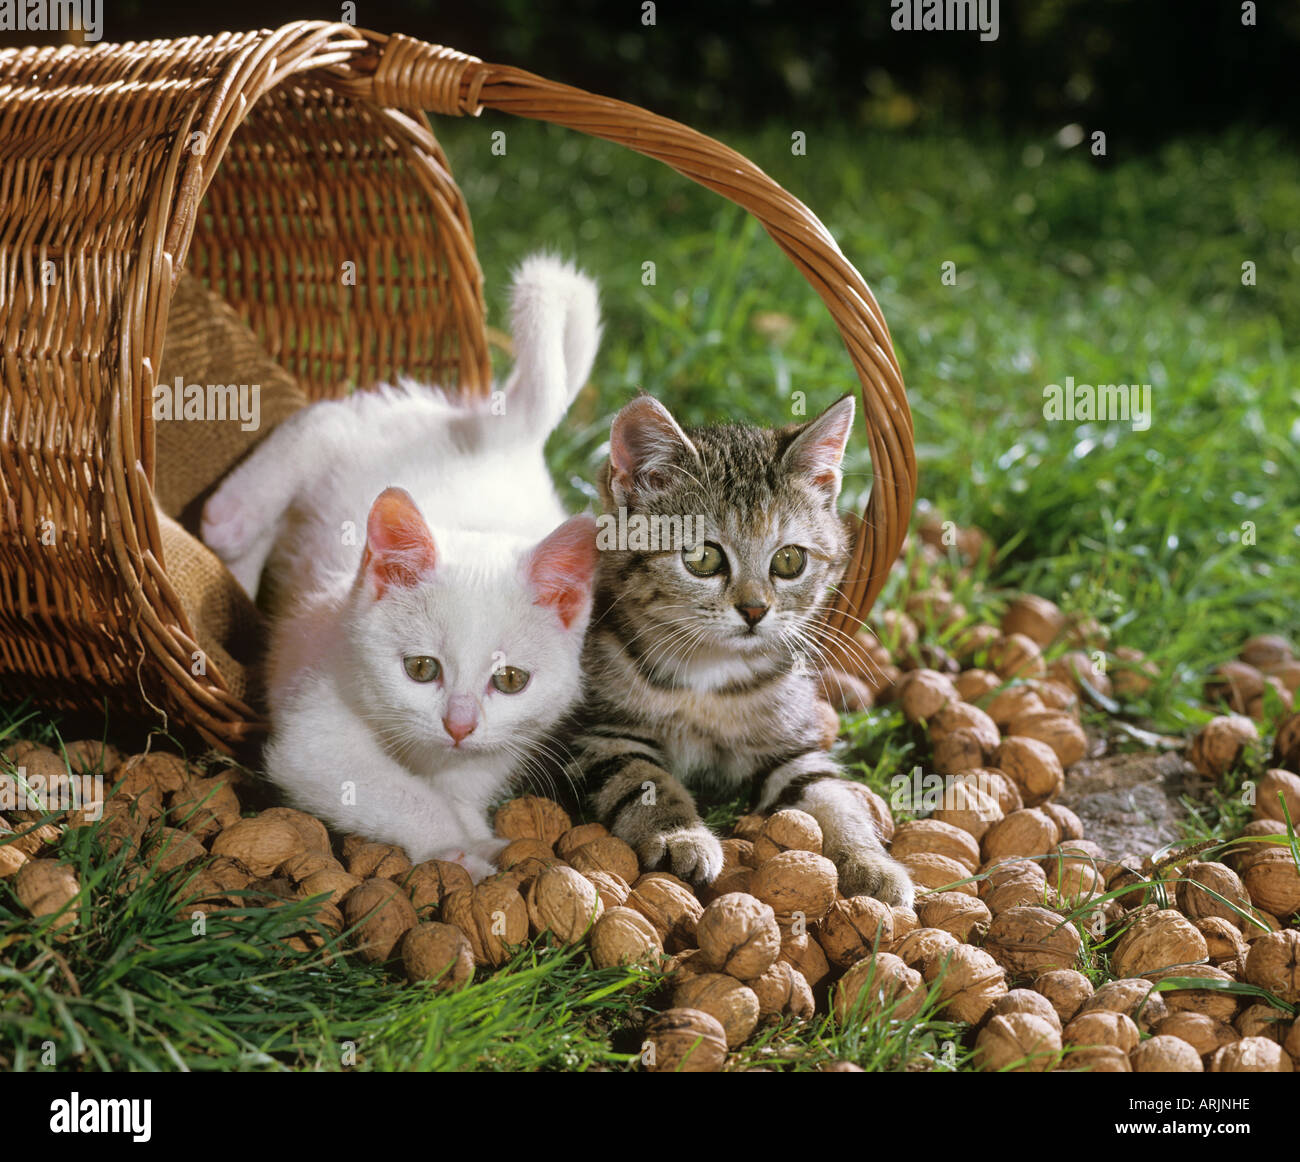 two young cats in basket with nuts Stock Photo